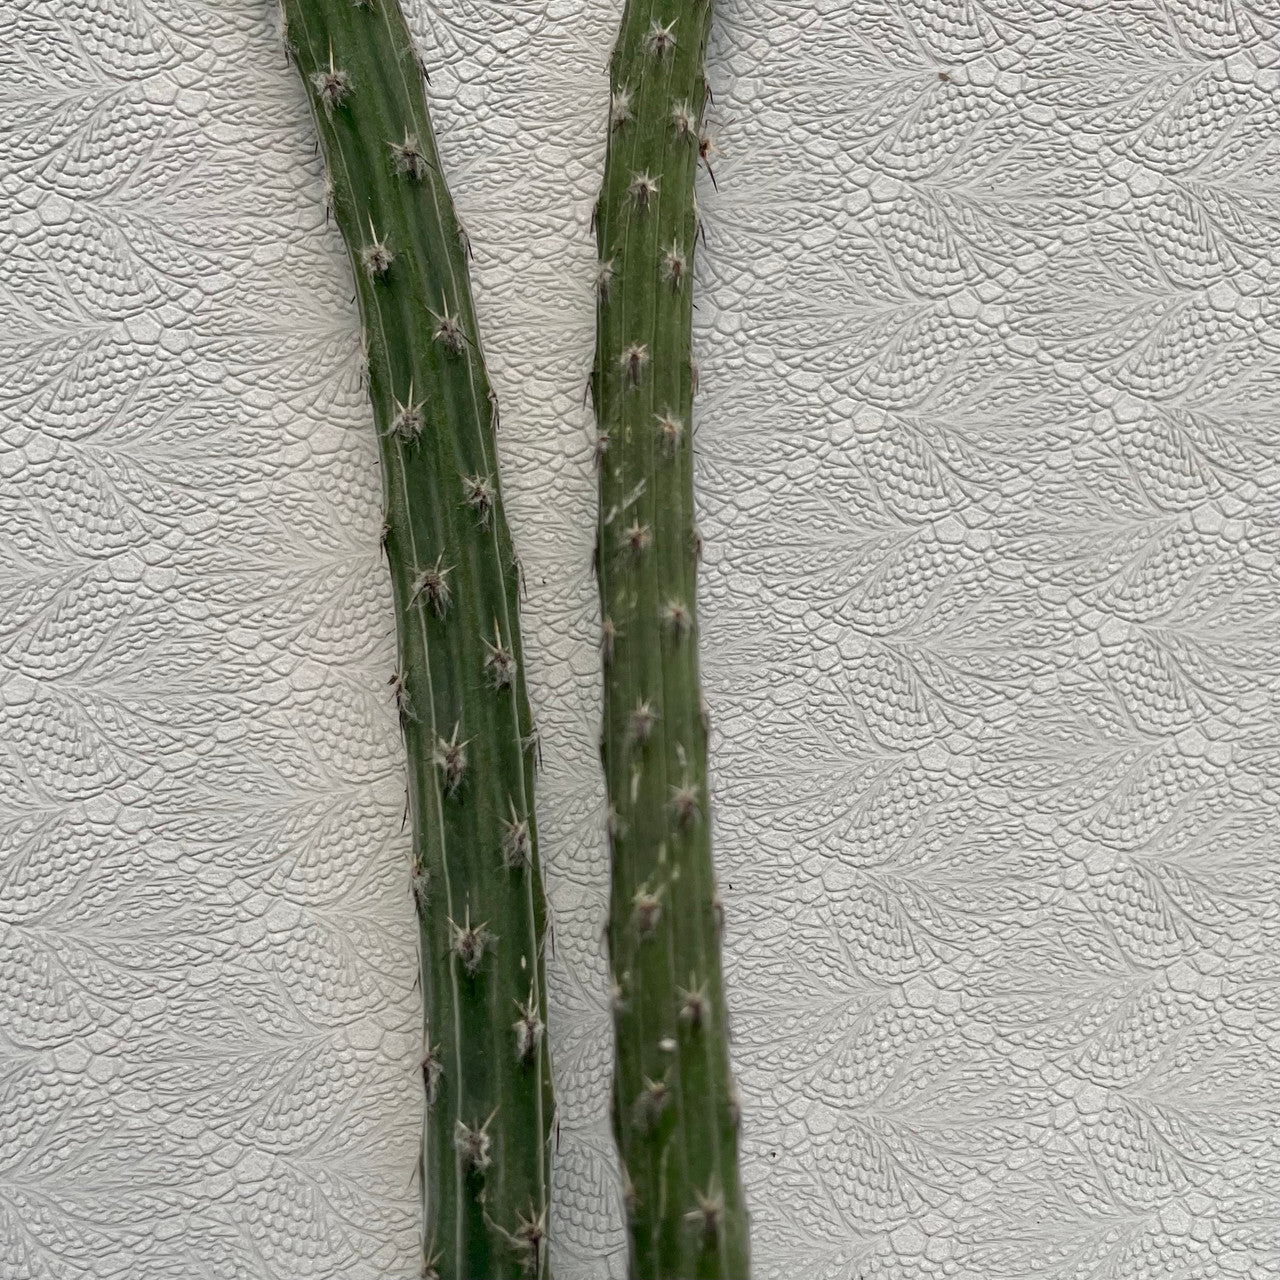 two peniocereus viperinus cuttings close up to show texture